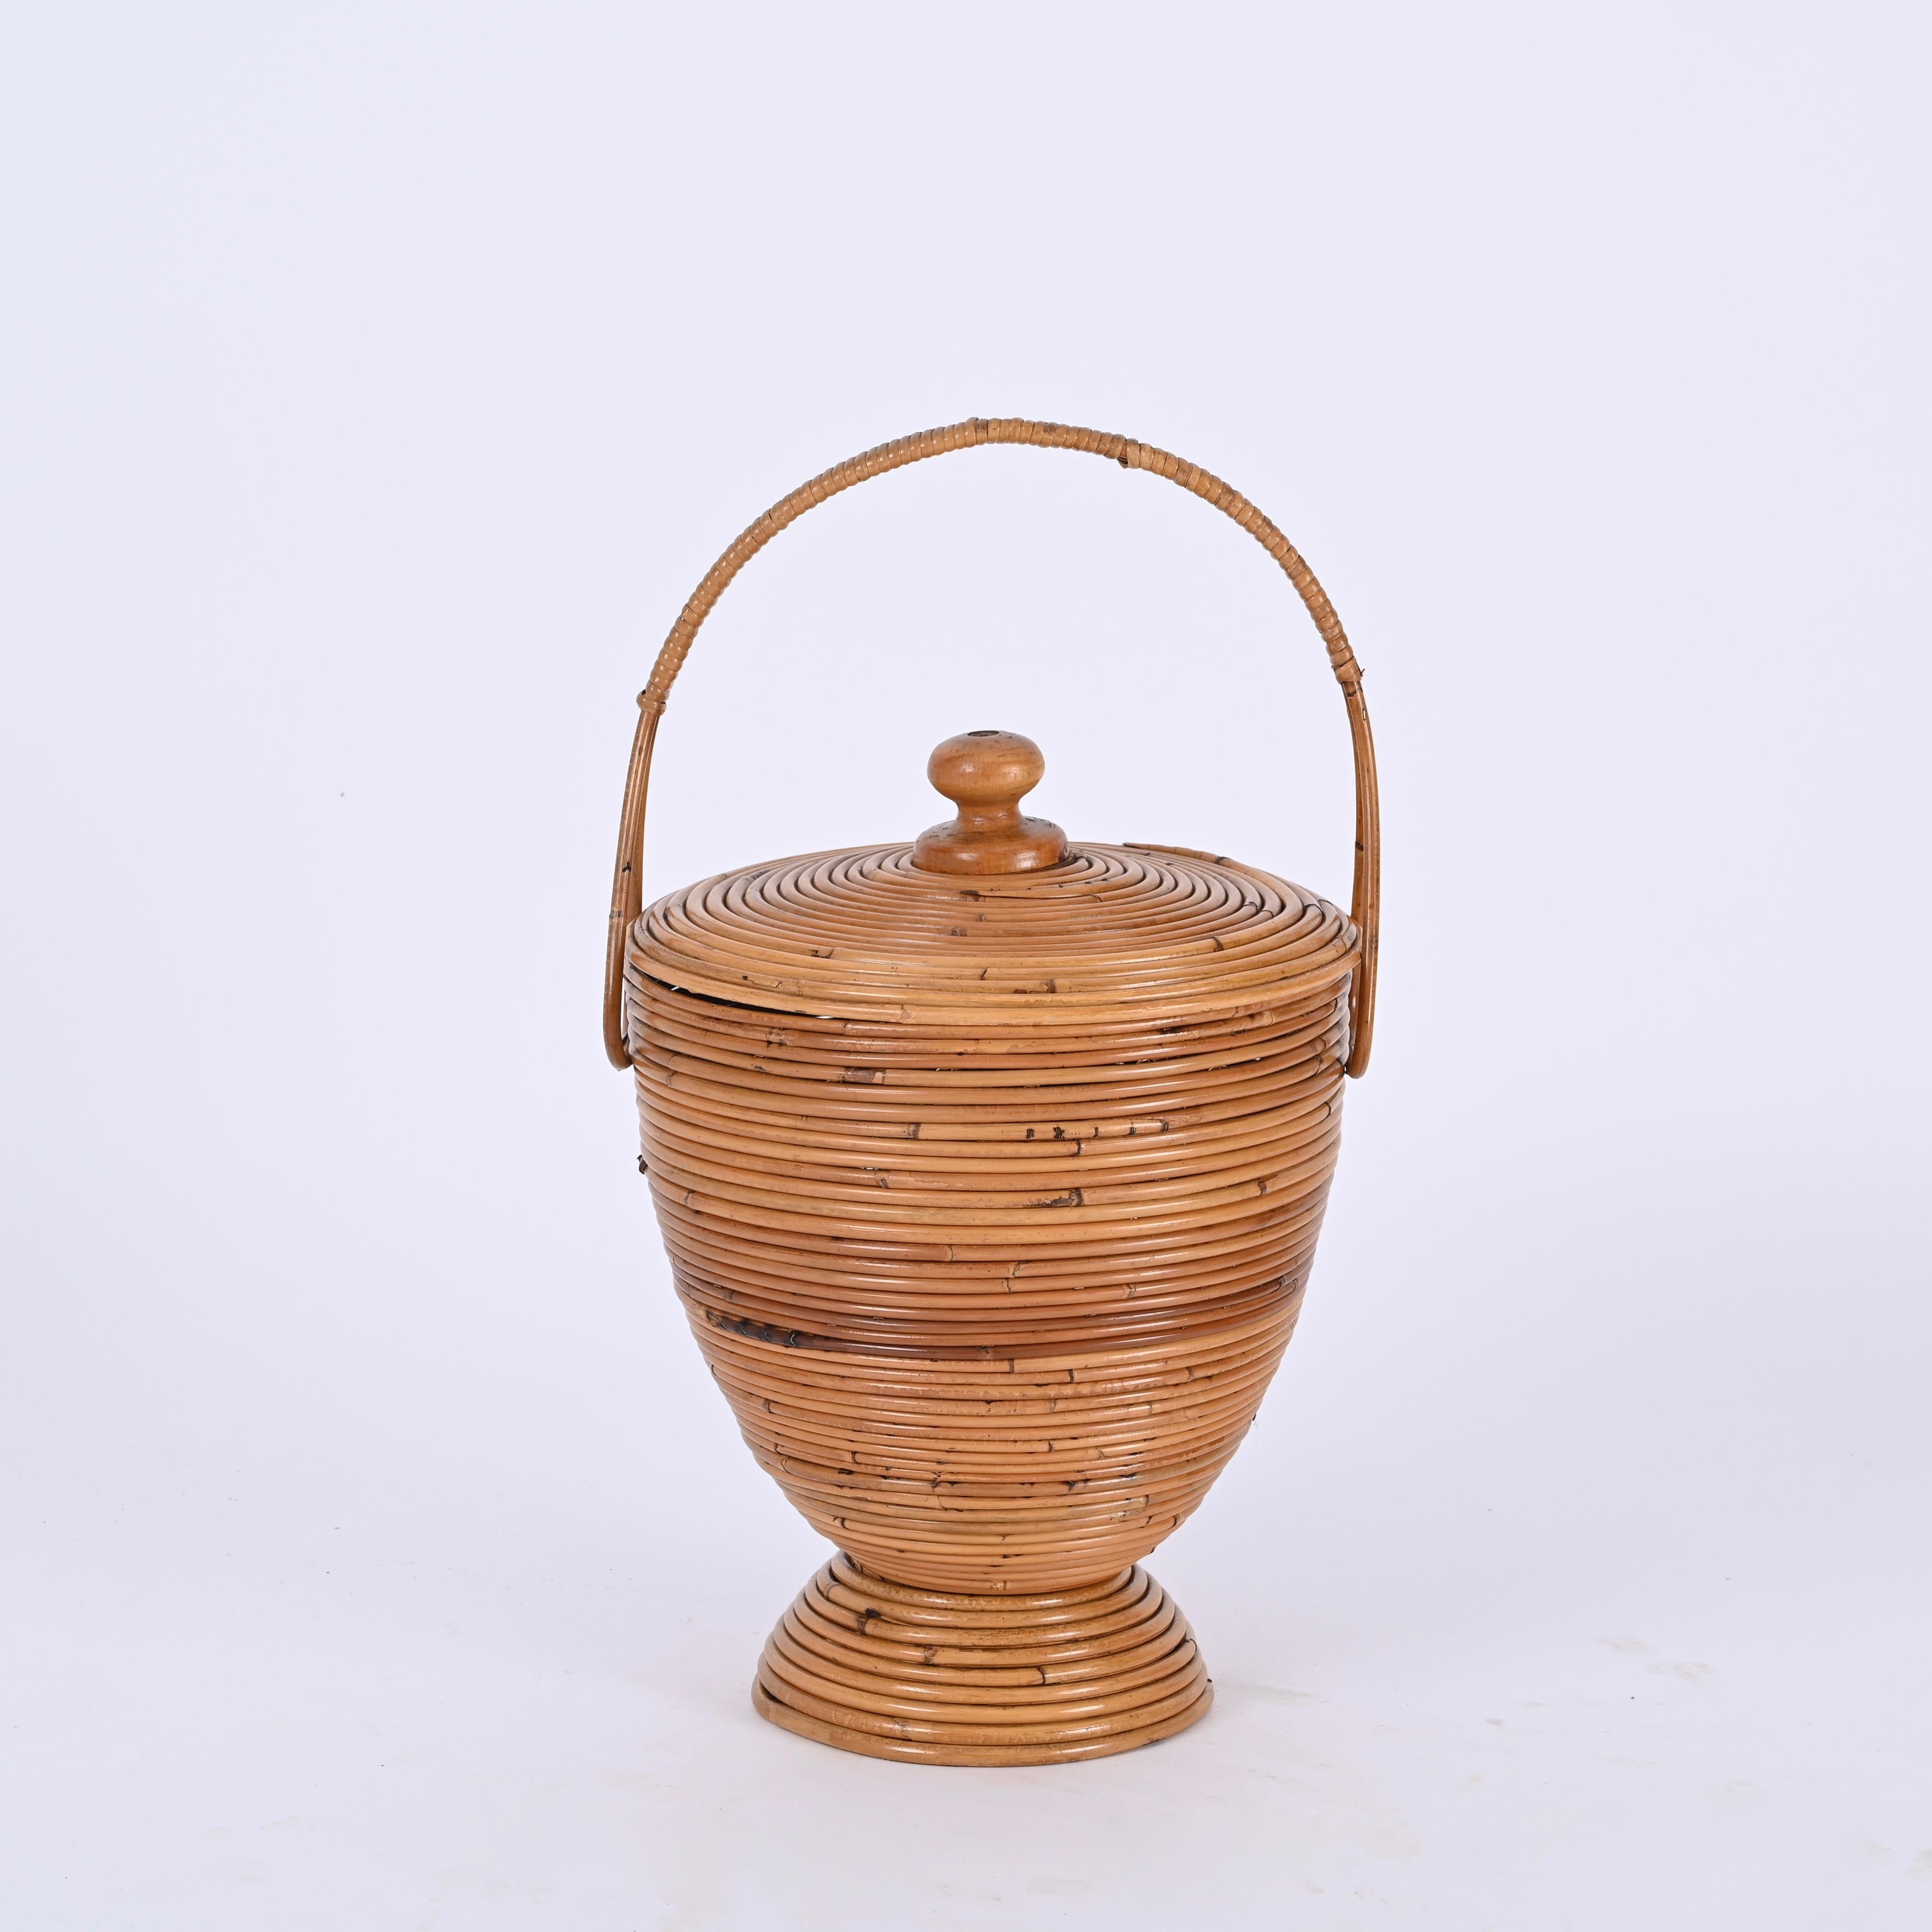 Italian Mid-Century Decorative Basket in Rattan and Wicker by Vivai del Sud, Italy 1970s For Sale